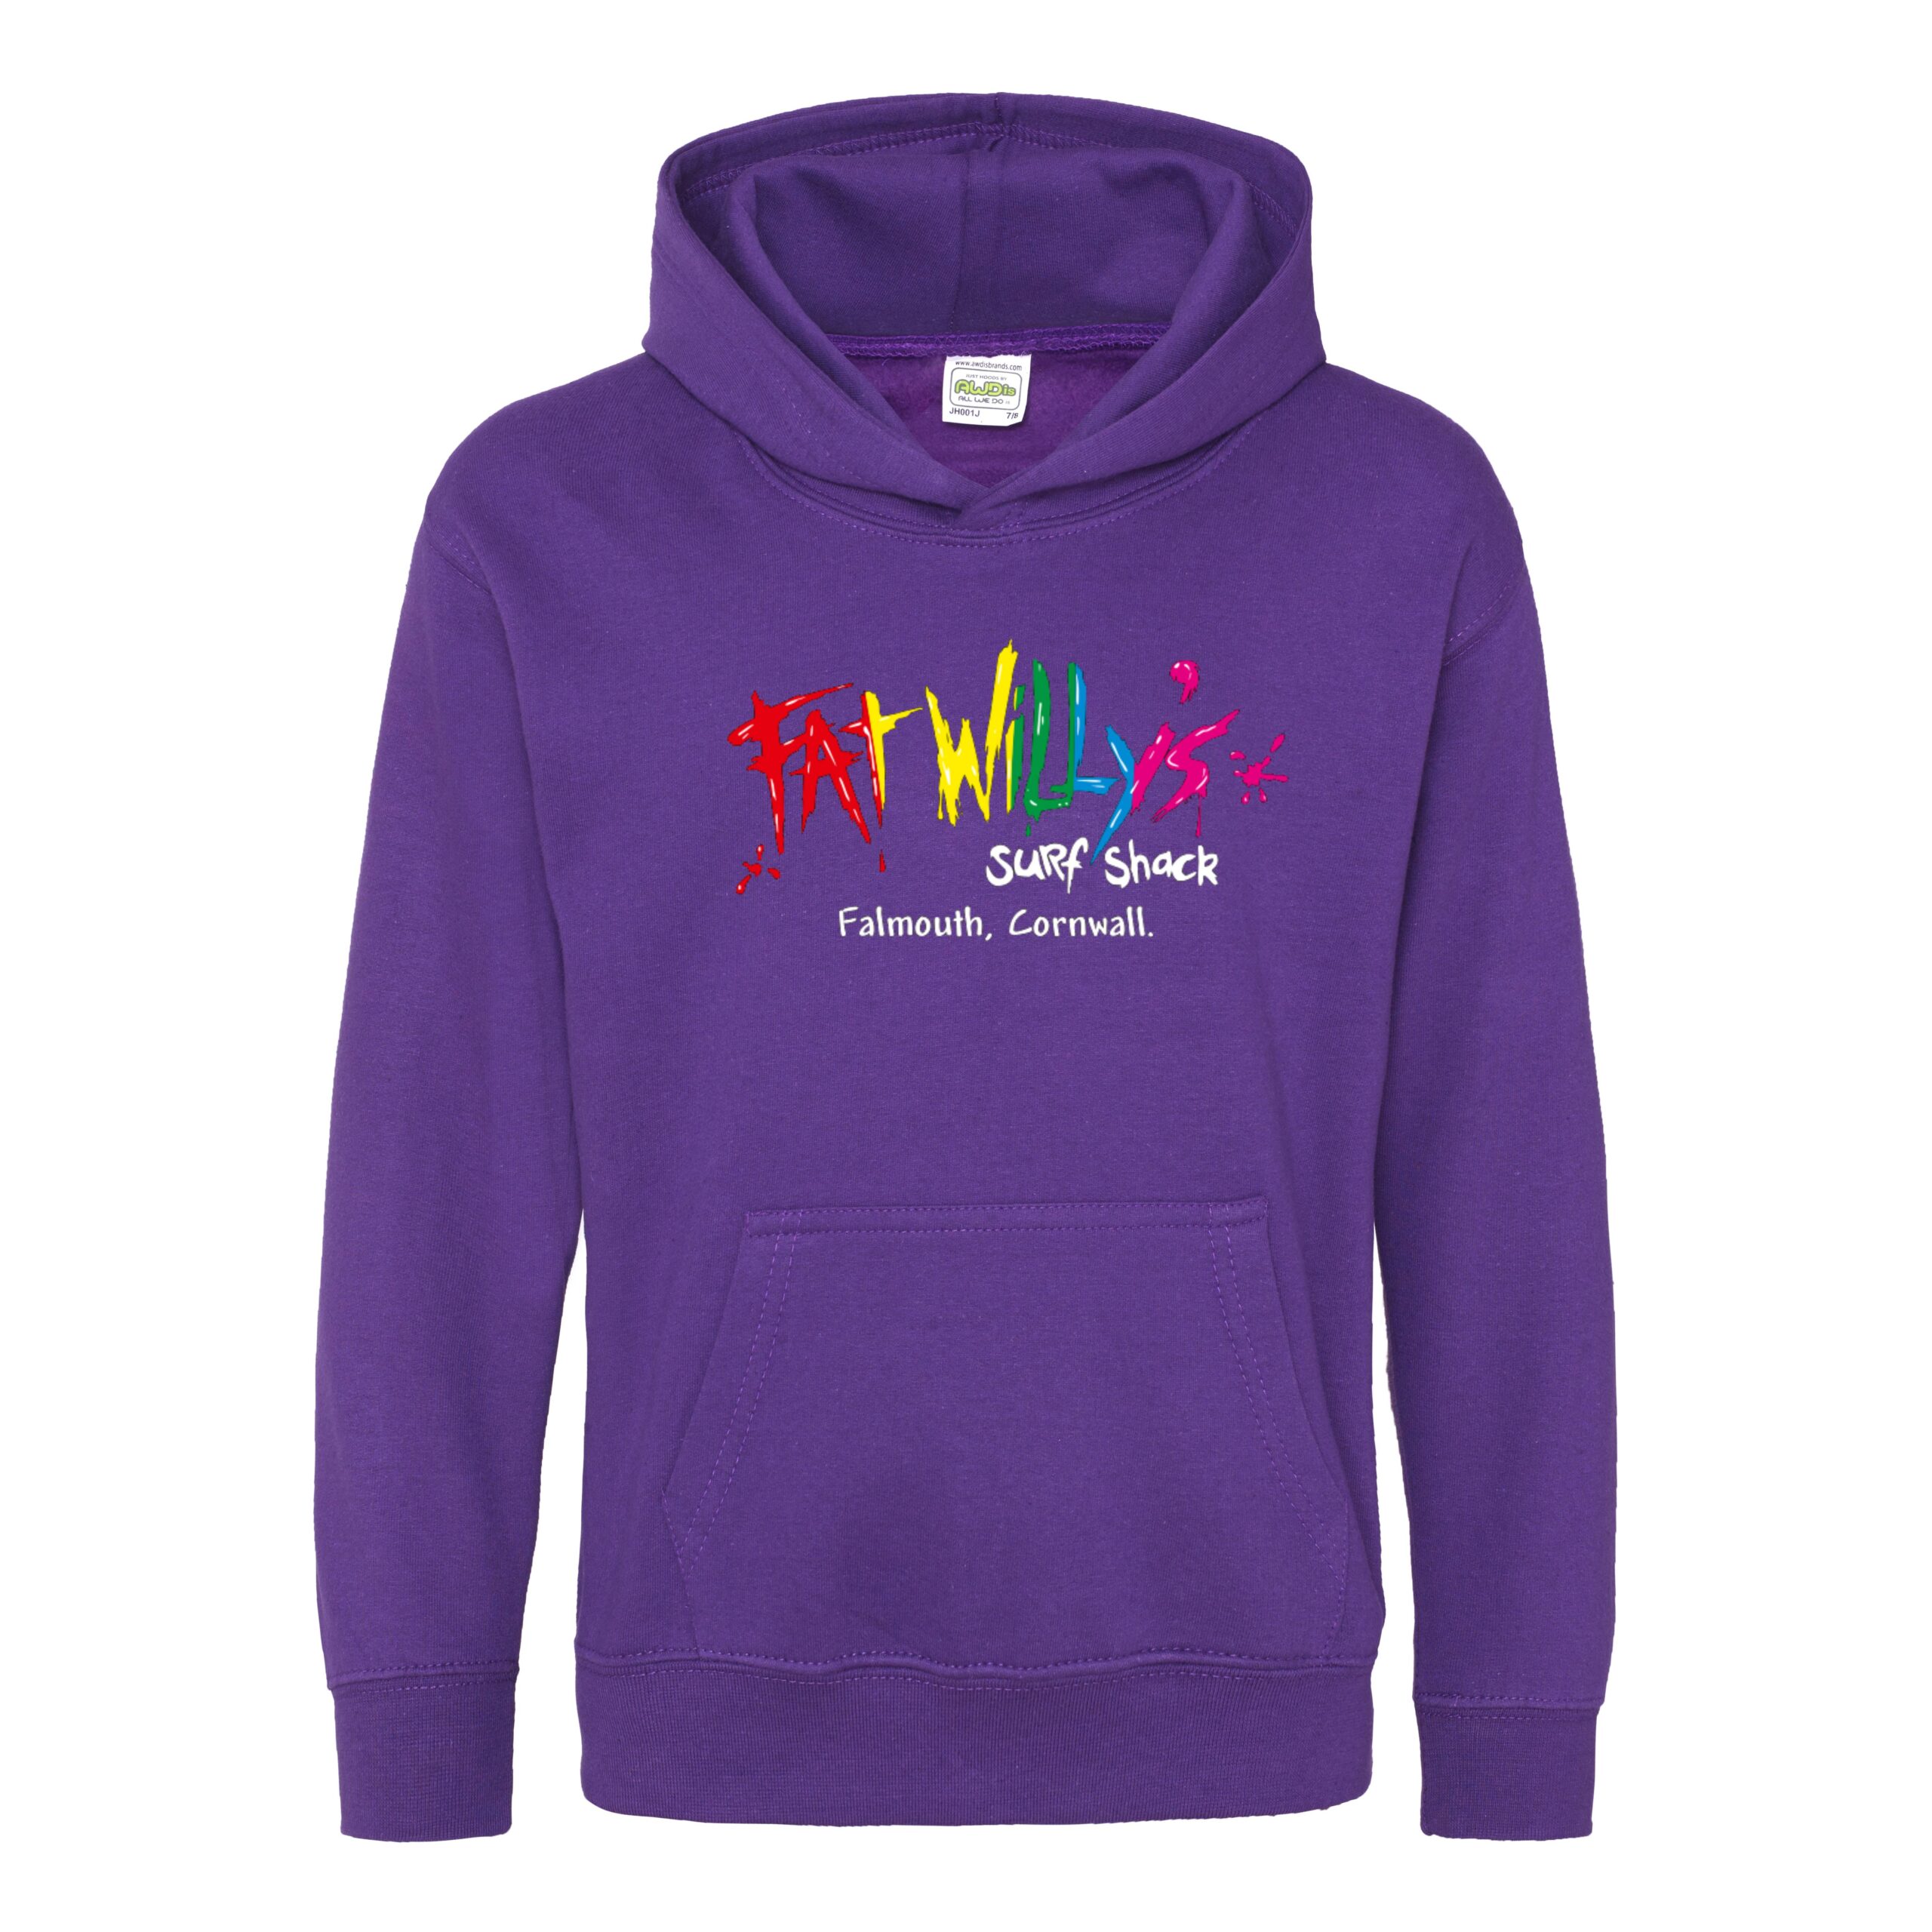 Kids Purple Hoodie - Fat Willy's - Fat Willy's Cornwall:Cornish surf ...